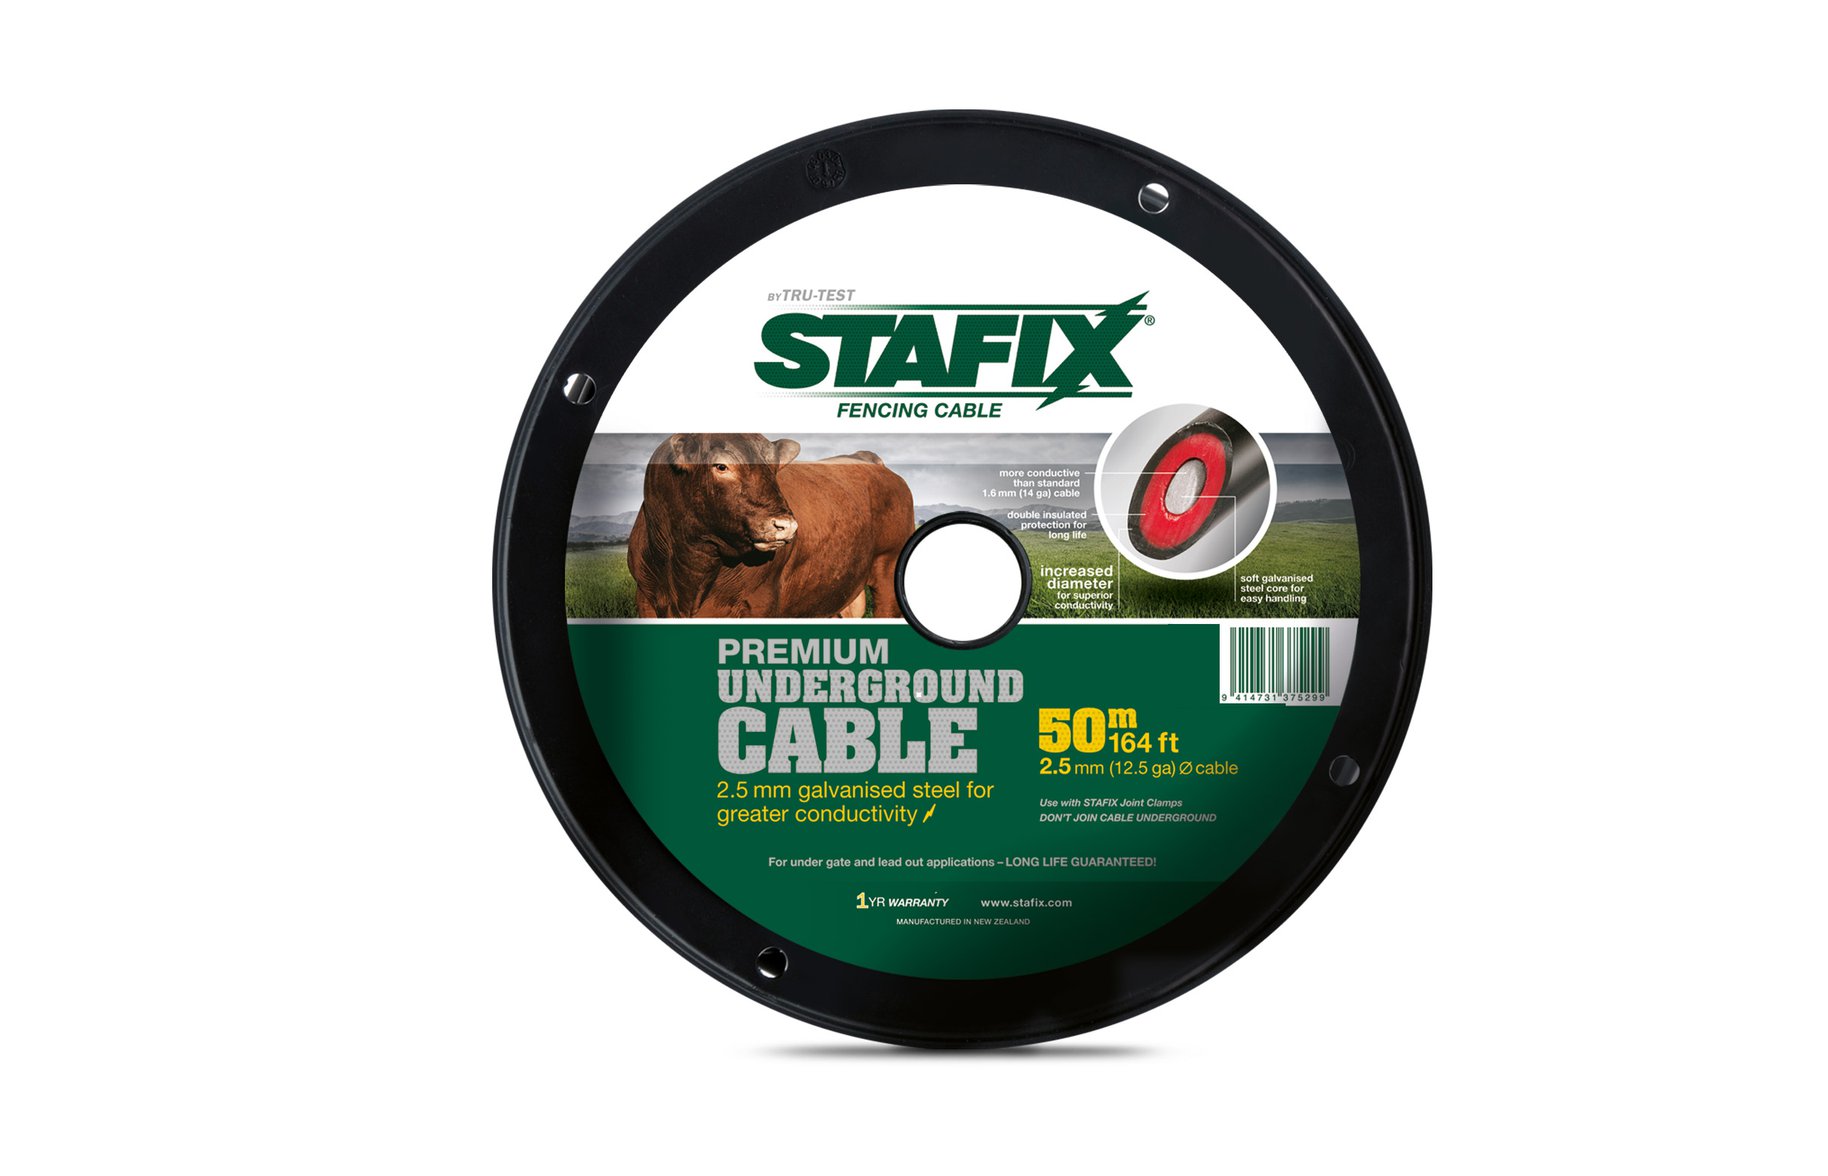 Stafix fencing cable packaging 